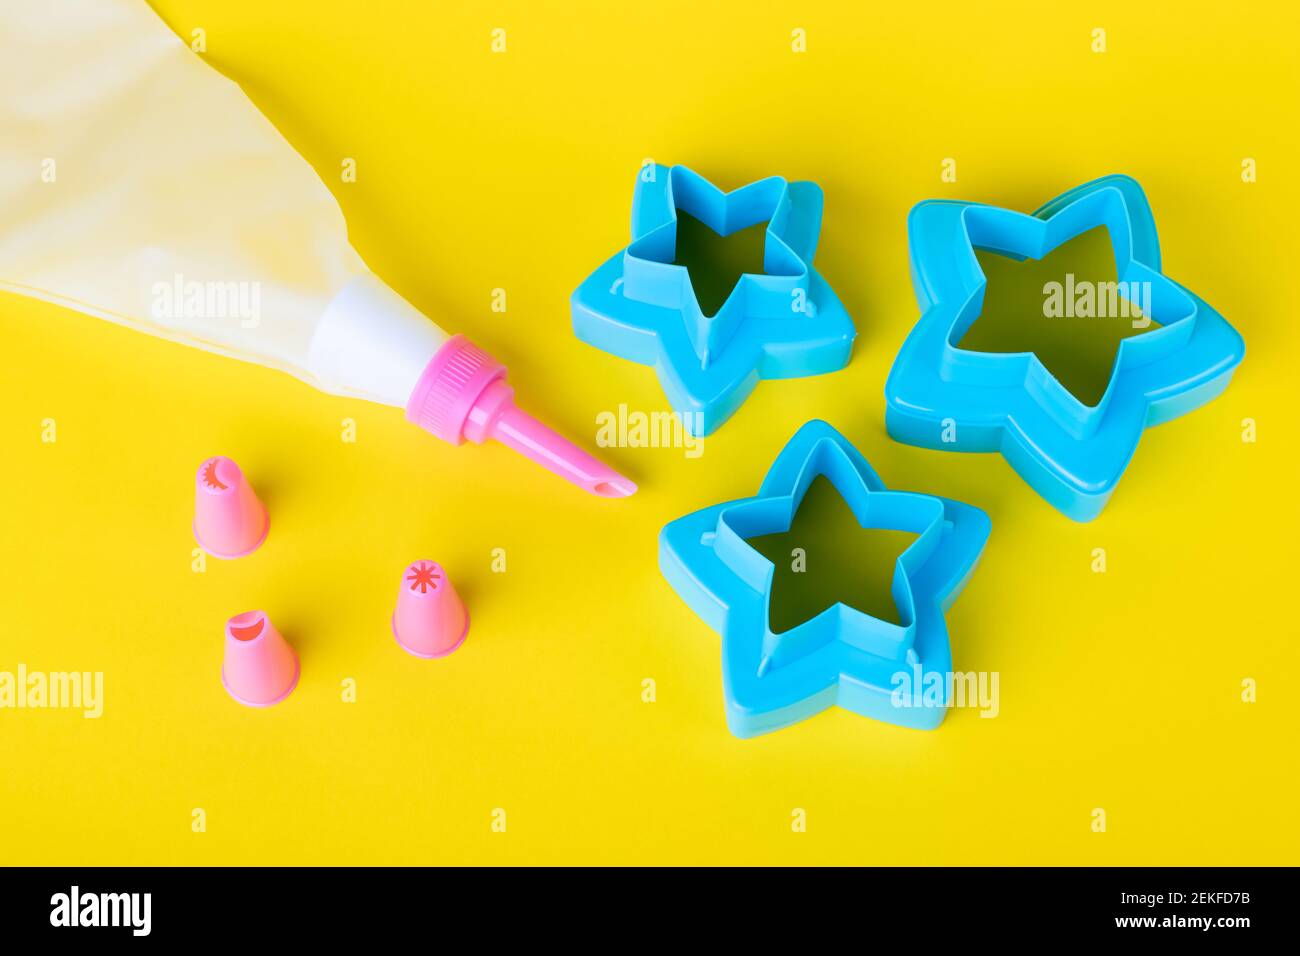 Star shaped cookie cutters. Cake decorating tools, pastry bag with nozzles on a yellow background for cake decorating. Confectionery cooking concept w Stock Photo